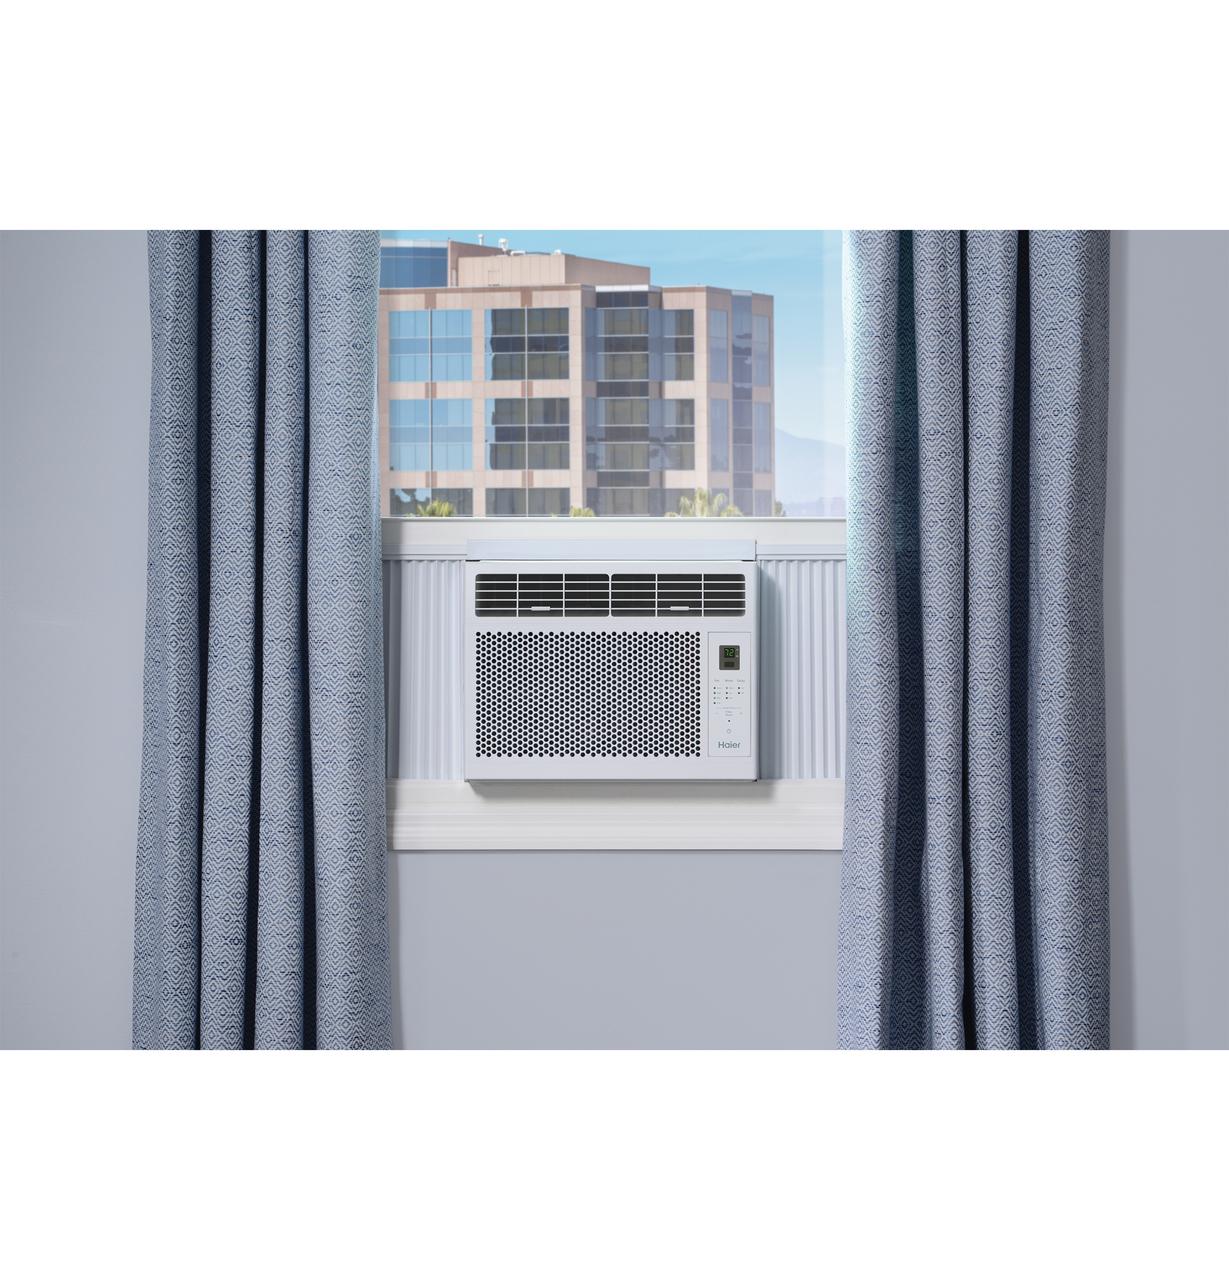 Haier QHEE06AC Haier 6,000 Btu Electronic Window Air Conditioner For Small Rooms Up To 250 Sq Ft.